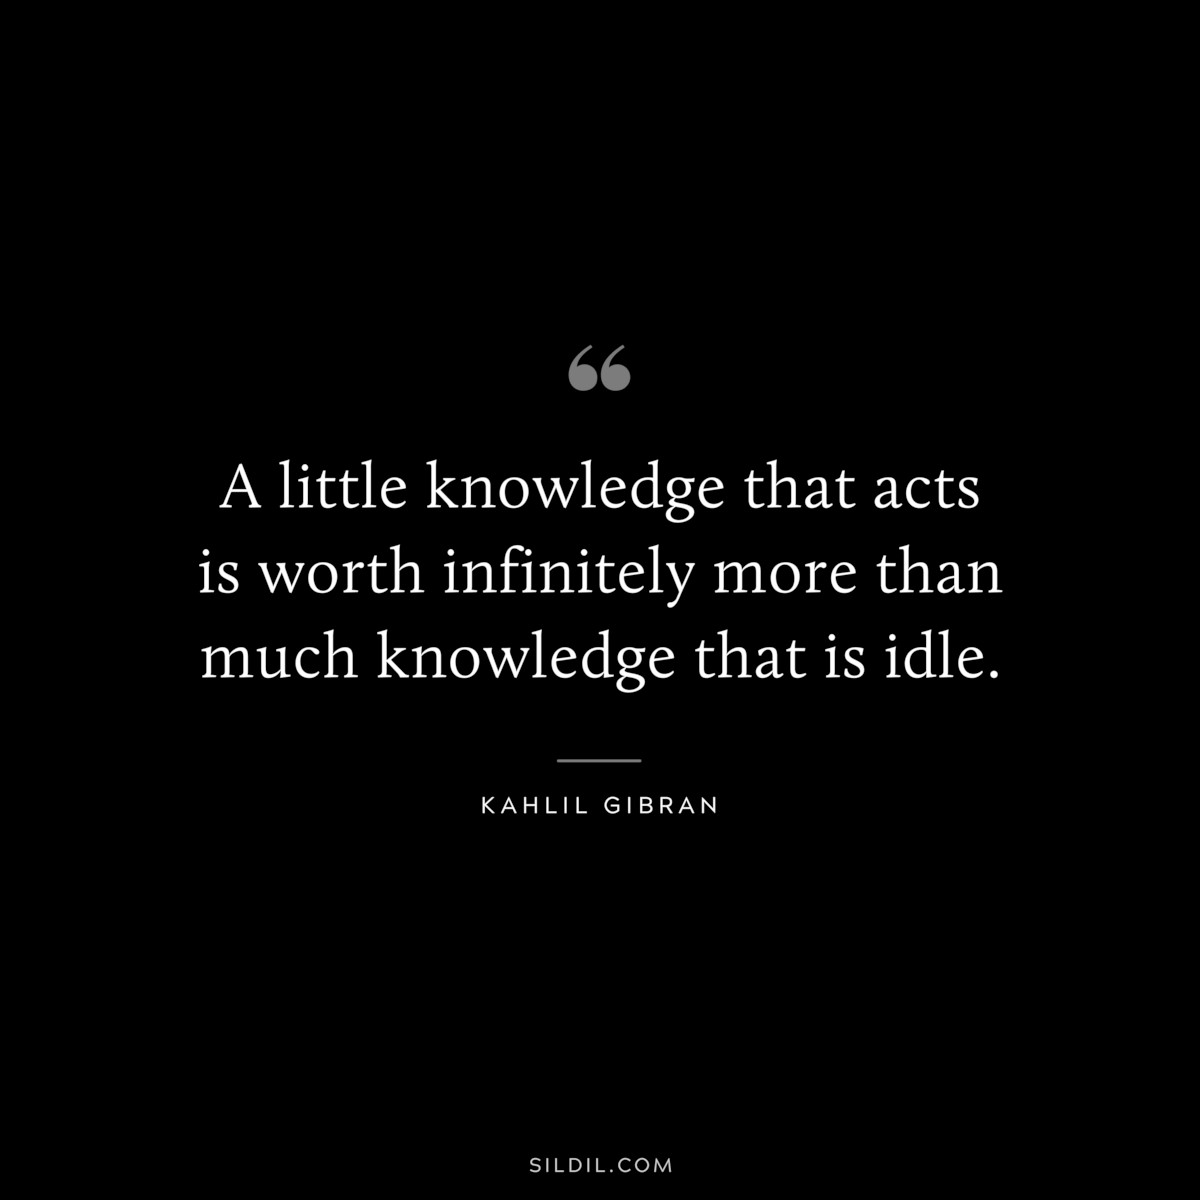 A little knowledge that acts is worth infinitely more than much knowledge that is idle. ― Kahlil Gibran